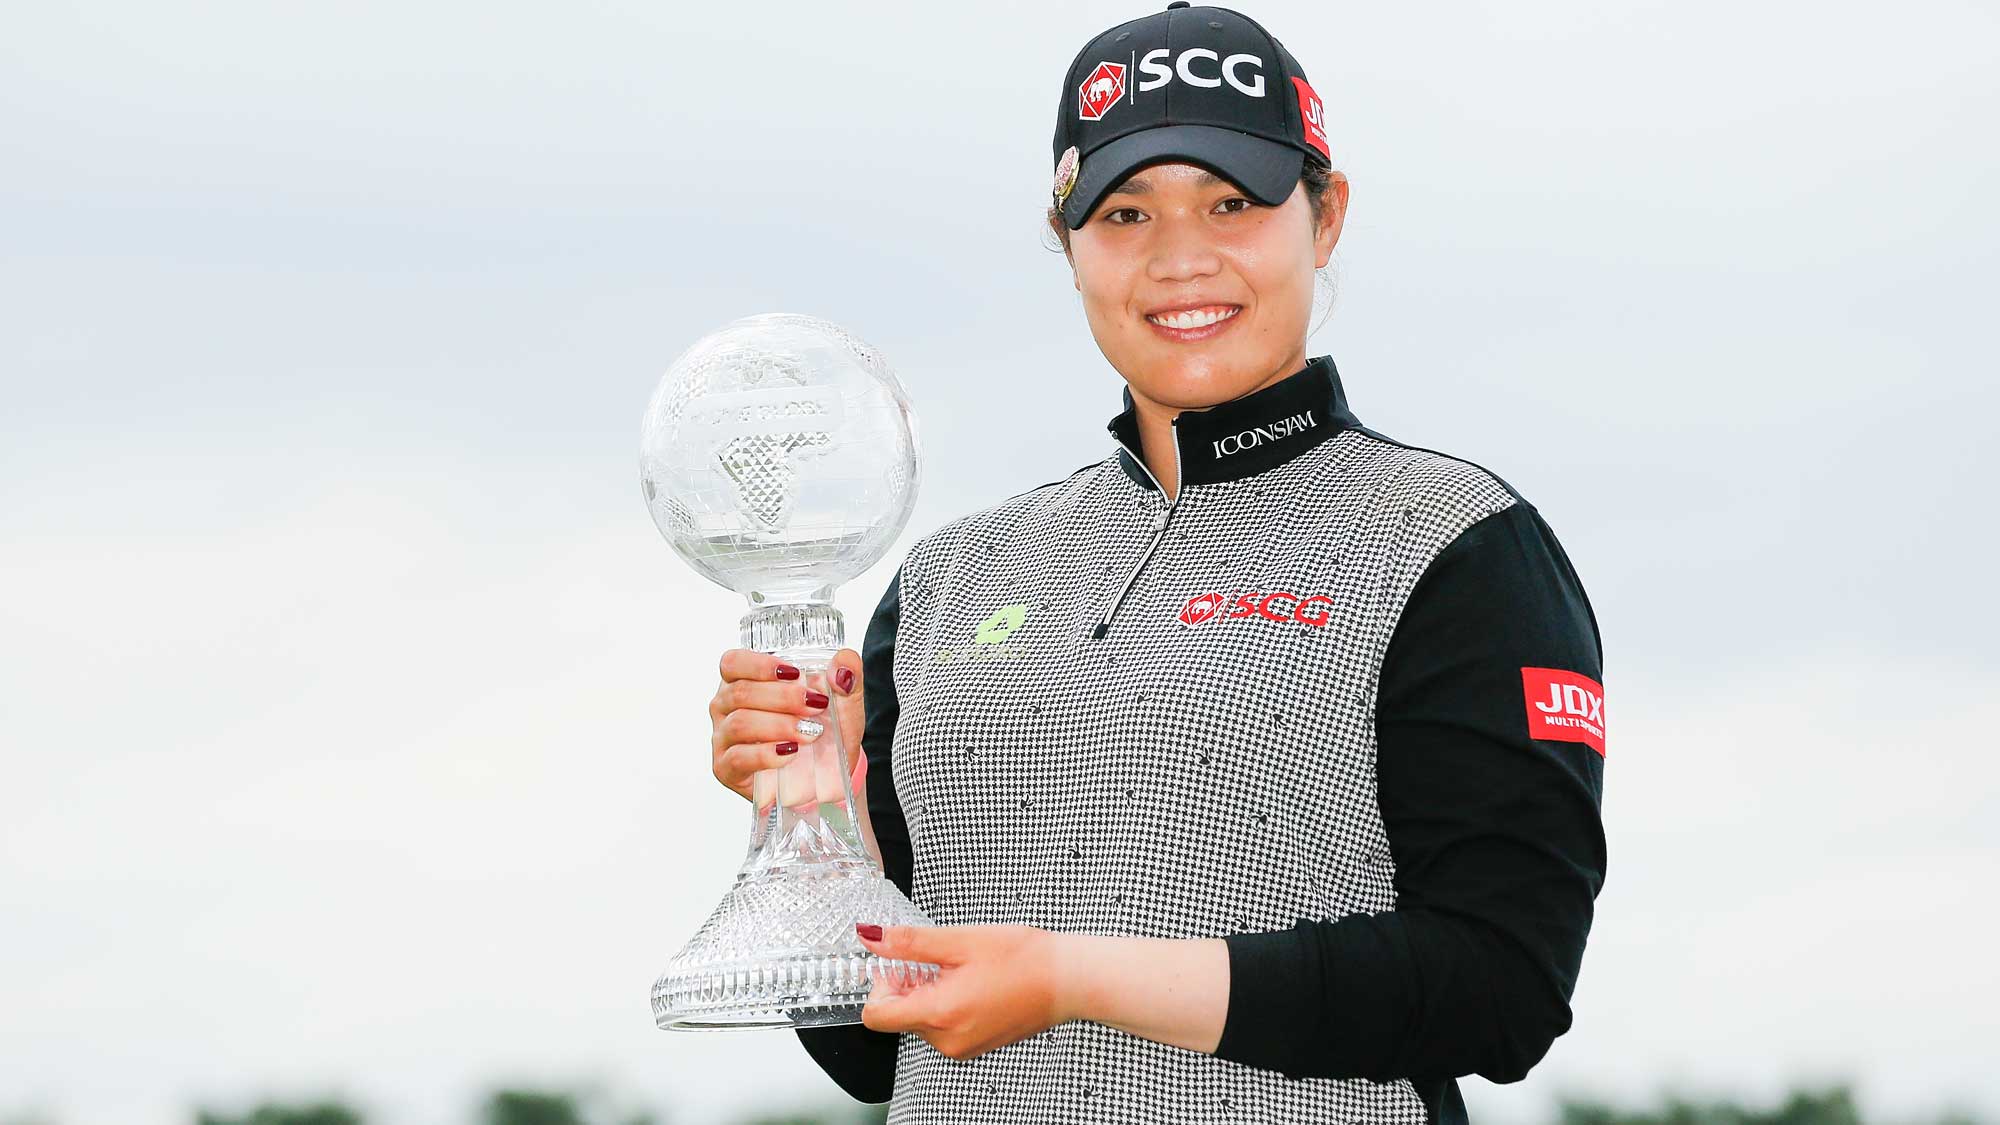 Ariya Jutanugarn of Thailand poses for a photo with the Race to the CME Globe trophy after the final round of the LPGA CME Group Tour Championship